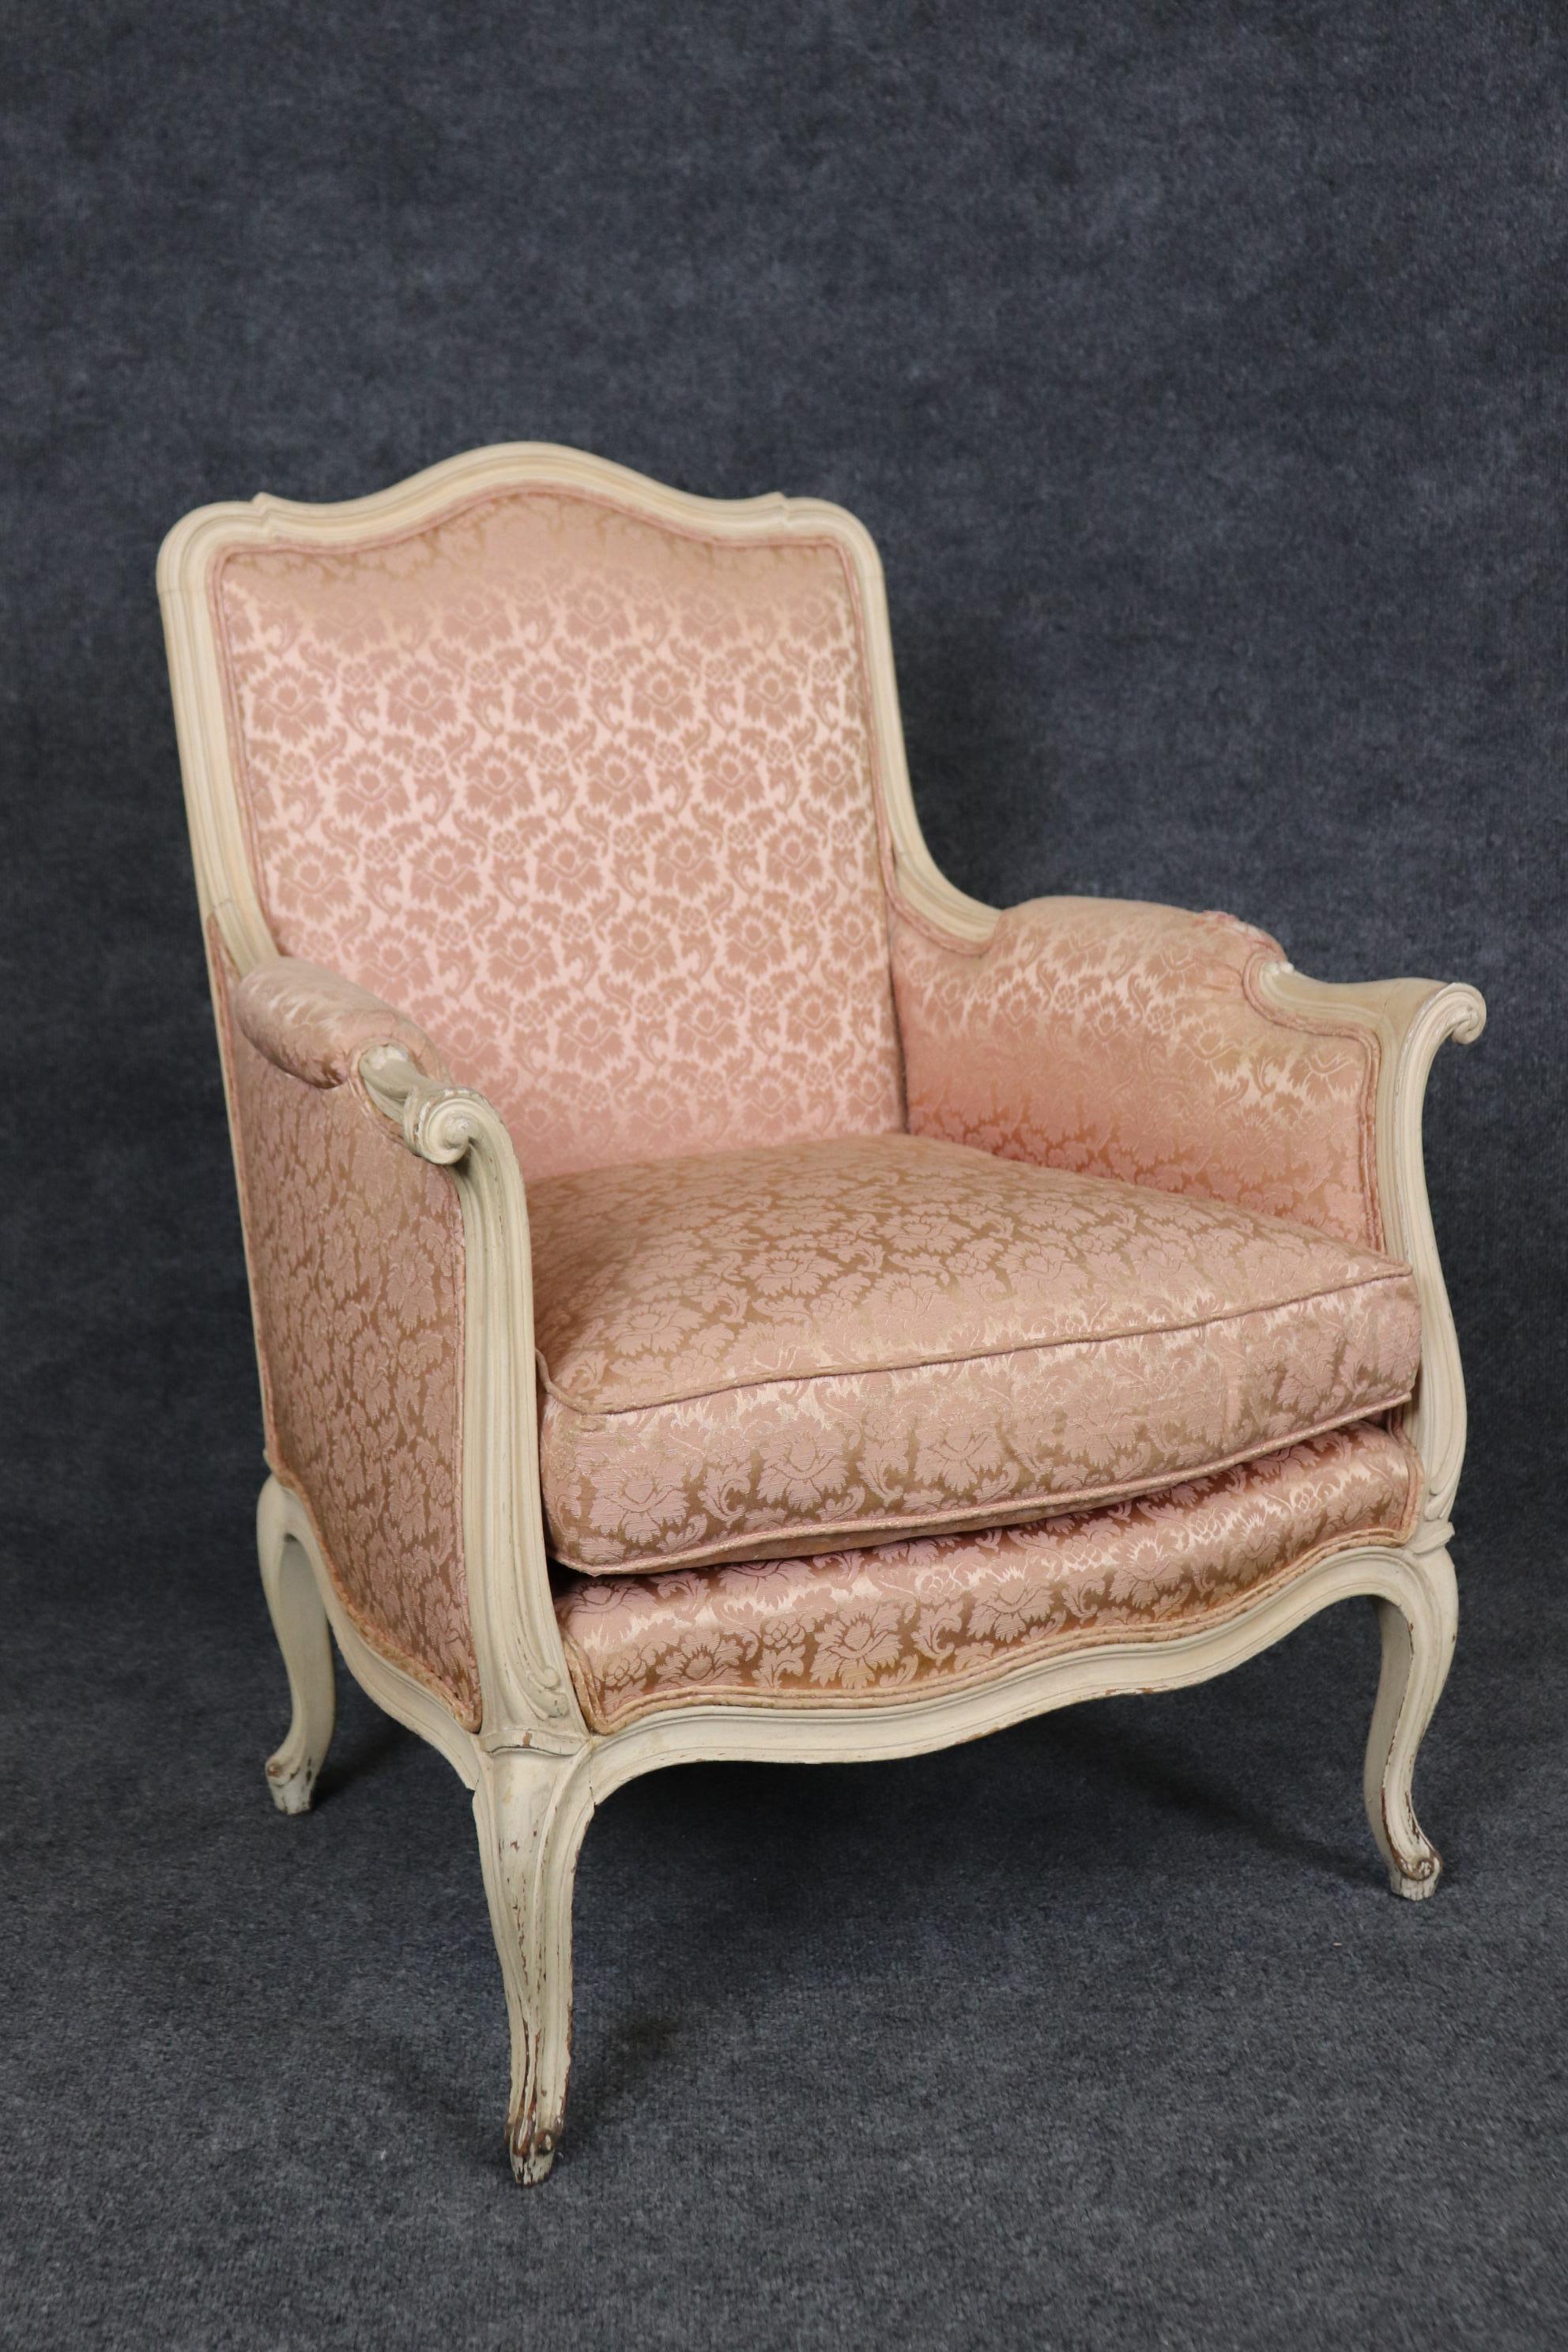 These painted distressed creme and rose blush bergeres are in good vintage condition and will show signs of age and wear from years of use., They are shown with paint losses and good upholstery but as the upholstery is original they will have